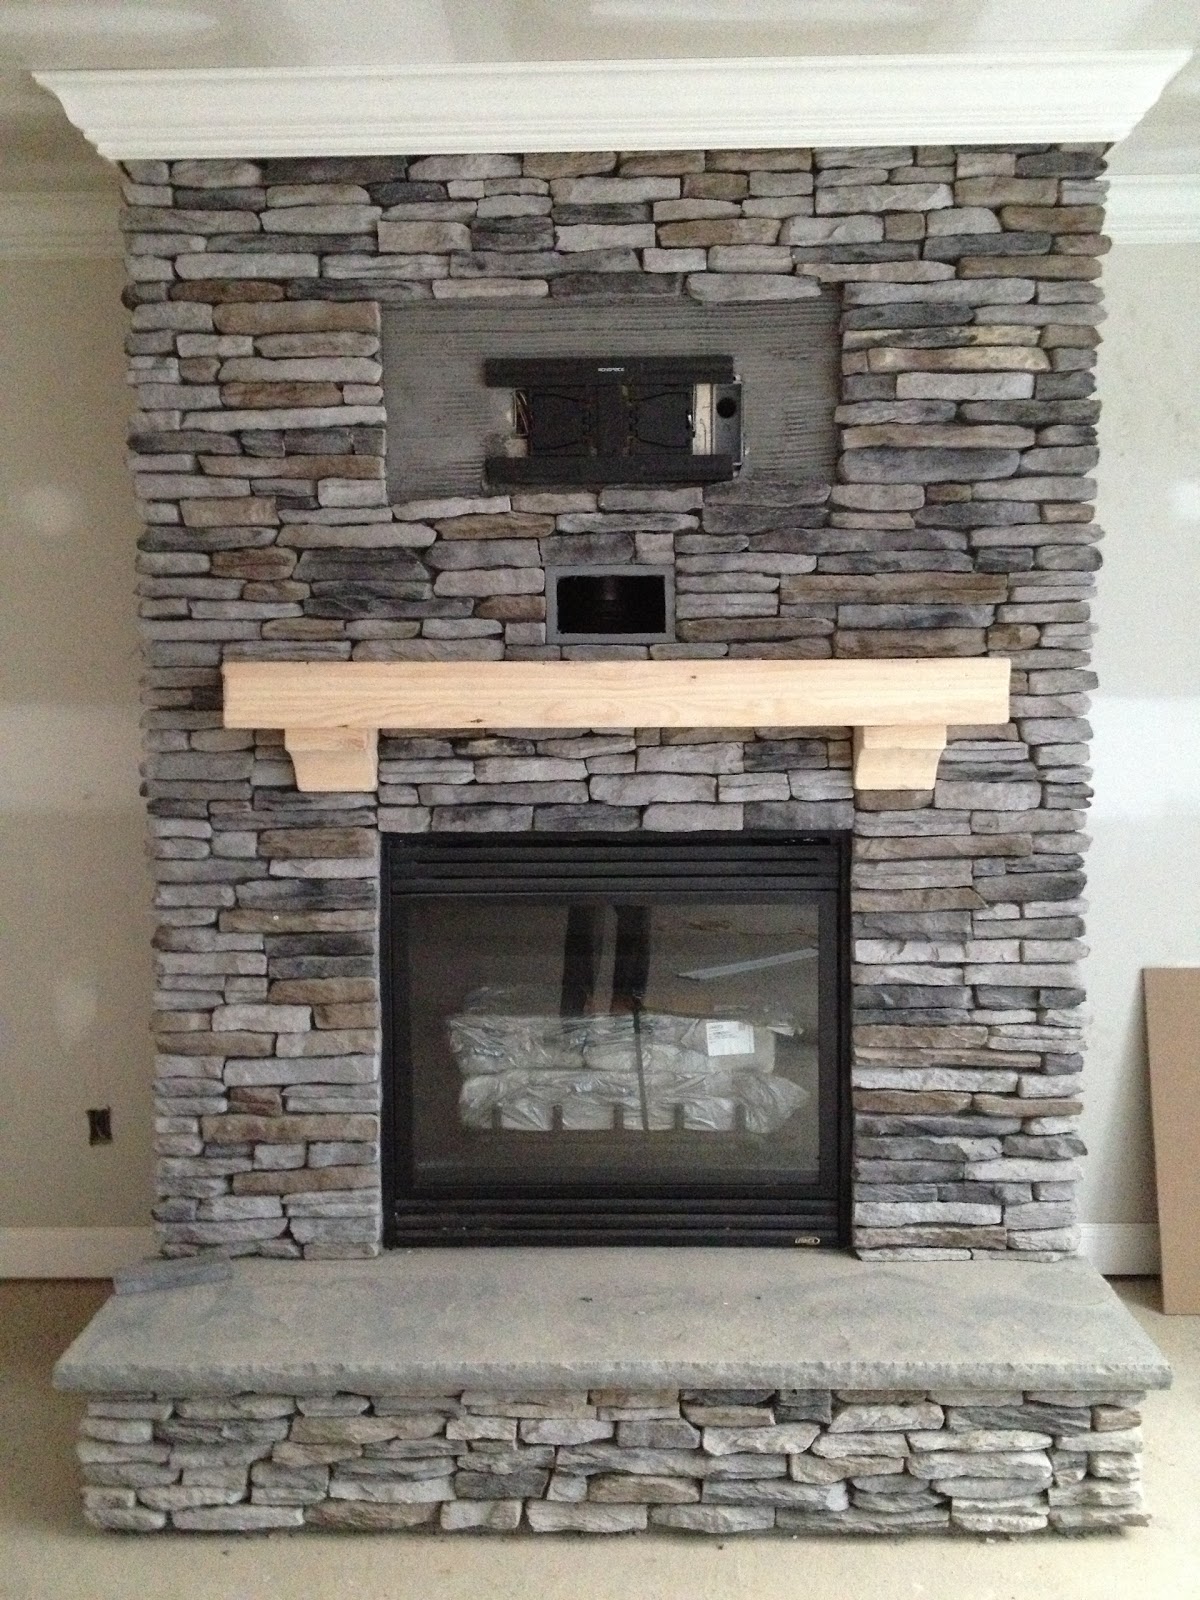 Fireplace Trim New Jmzwbk Home Building Electric Fireplace Trim and Paint